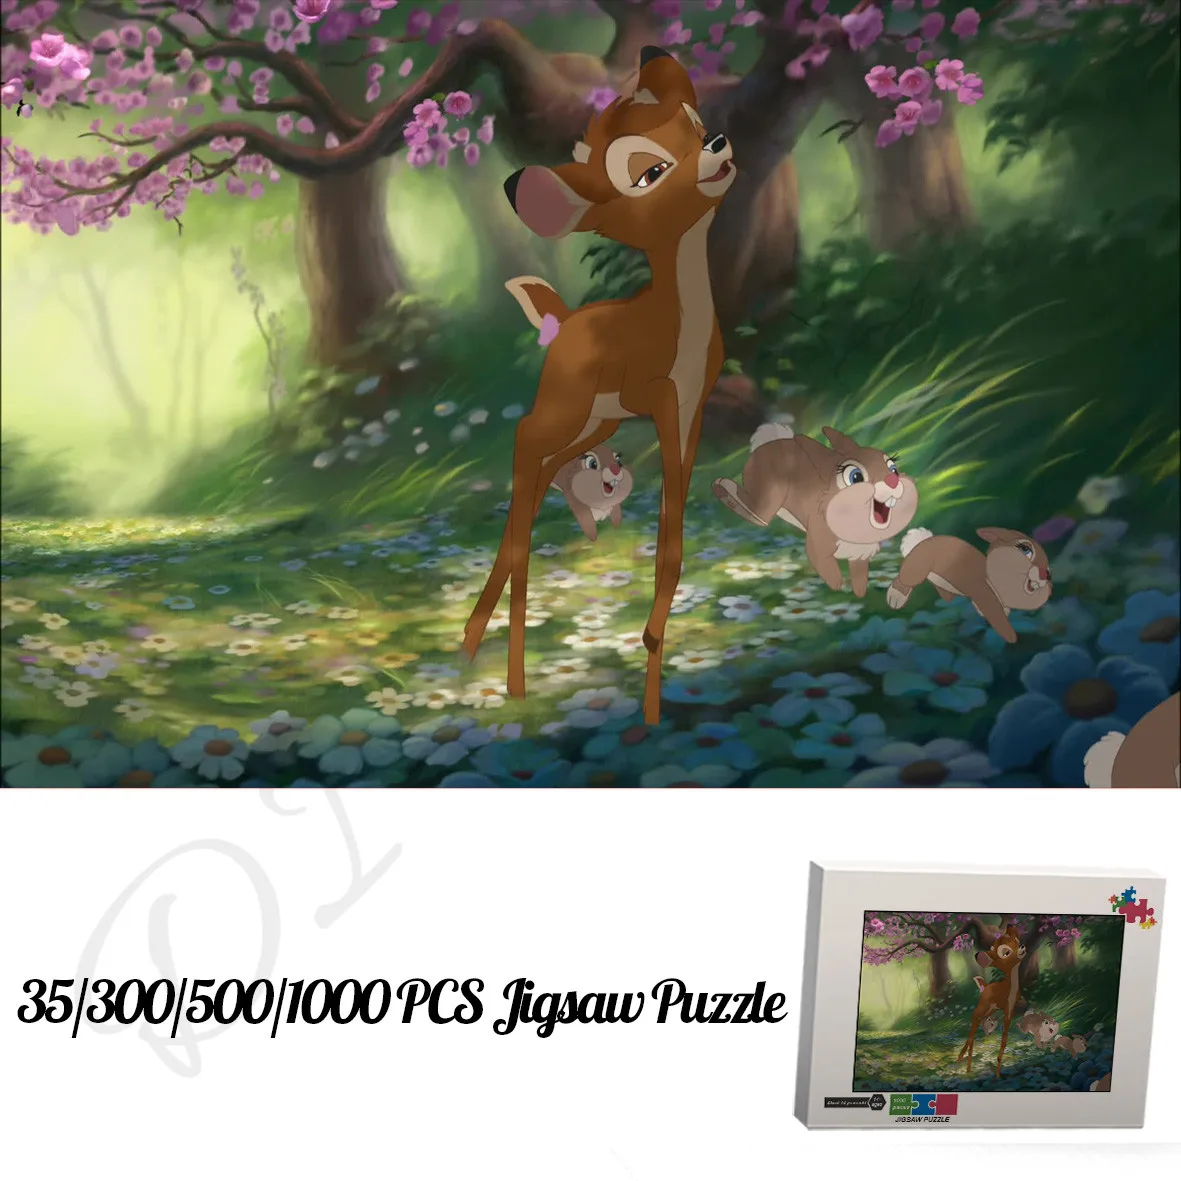 

Bambi 35 300 500 1000 Pieces Jigsaw Puzzles Disney Cartoon Animation Wooden and Box Puzzles for Kids Decompressed Funny Toys